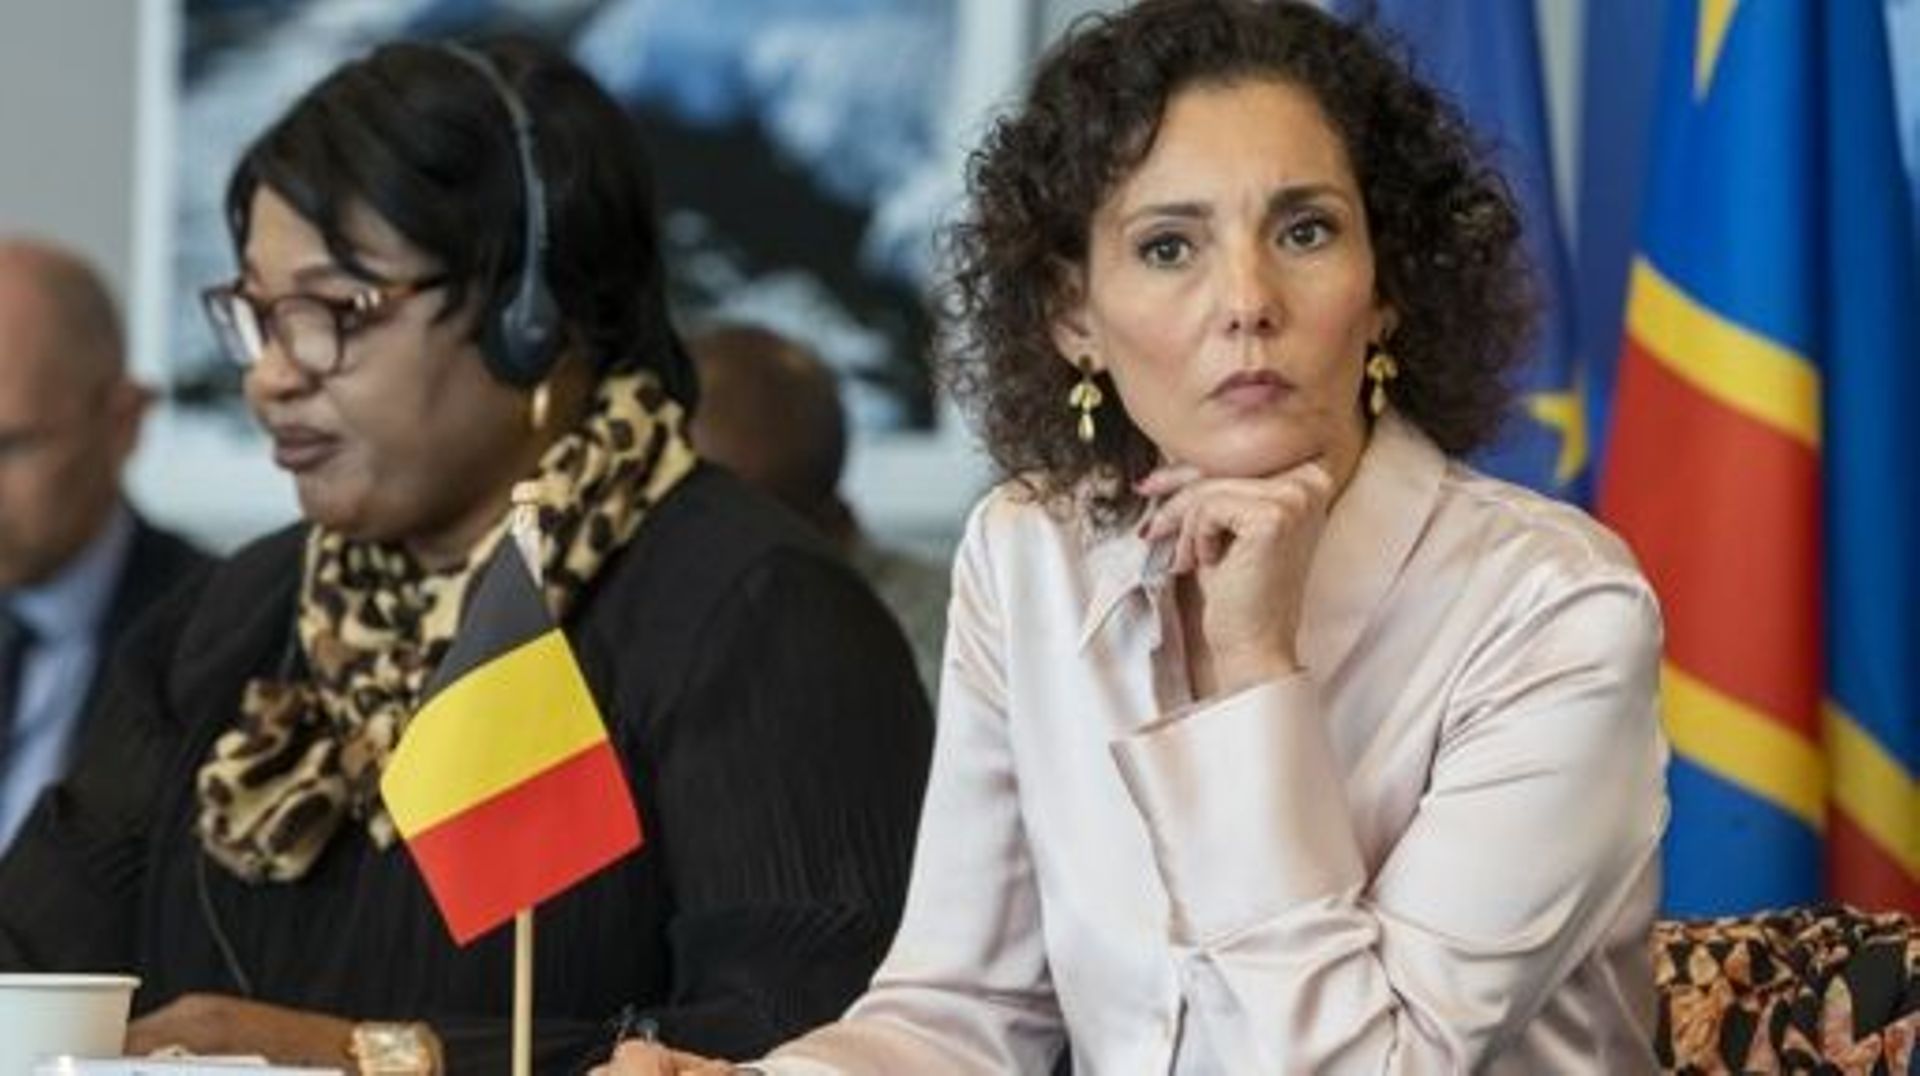 Gisele Ndaya Luseba and Foreign minister Hadja Lahbib pictured during an event on the prevention of sexual violence in conflict situations, in the margin of the 77th session of the United Nations General Assembly (UNGA 77), in New York City, United States